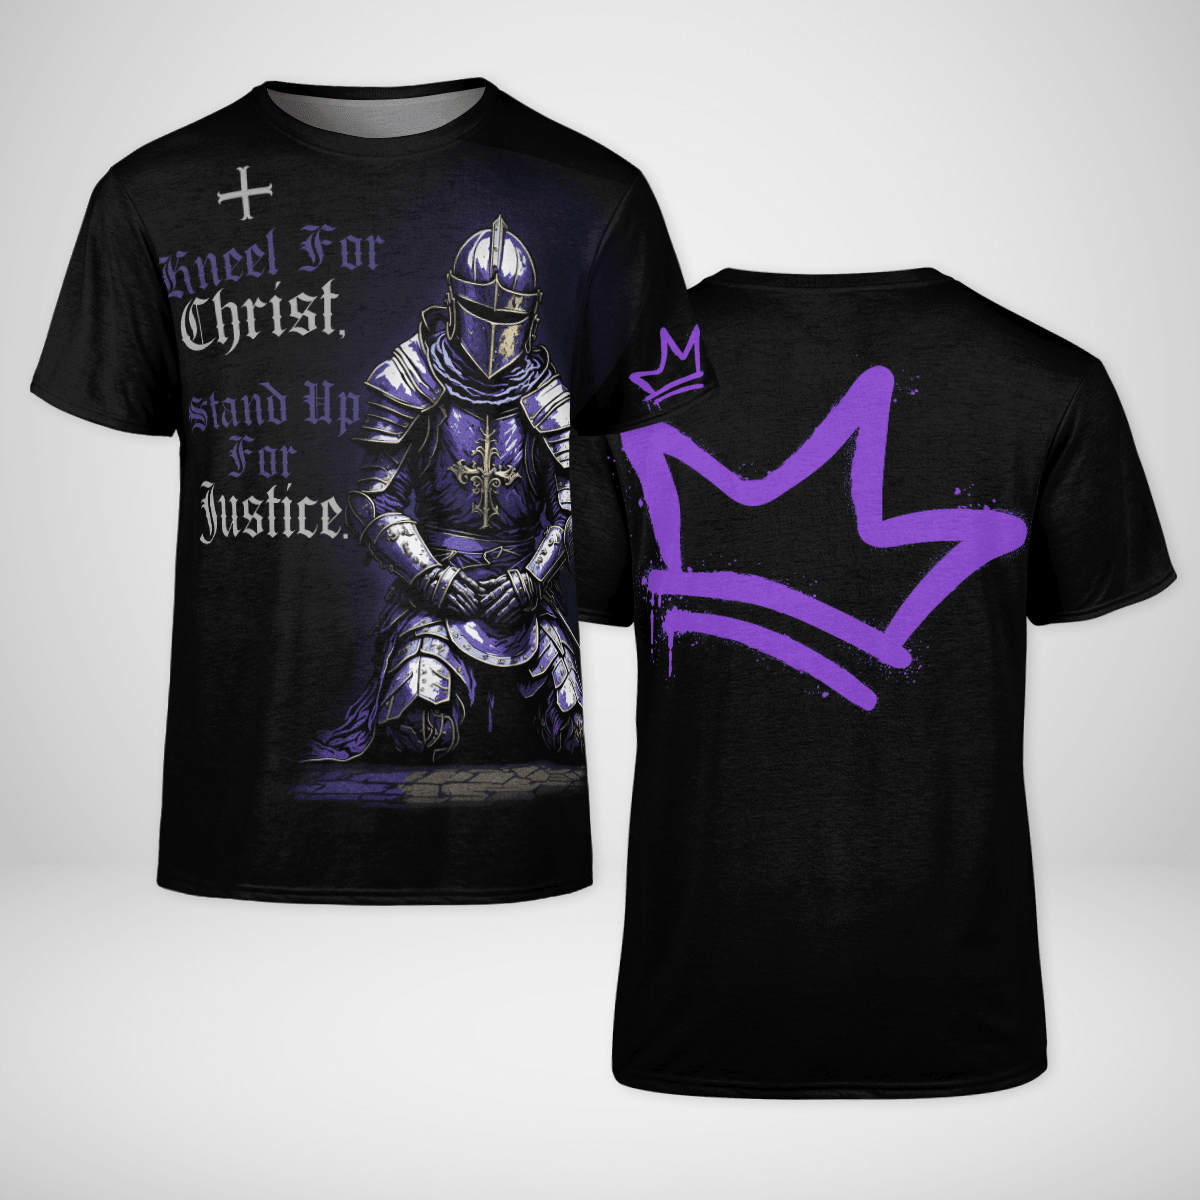 Kneel For Christ, Stand Up For Justice Shirt